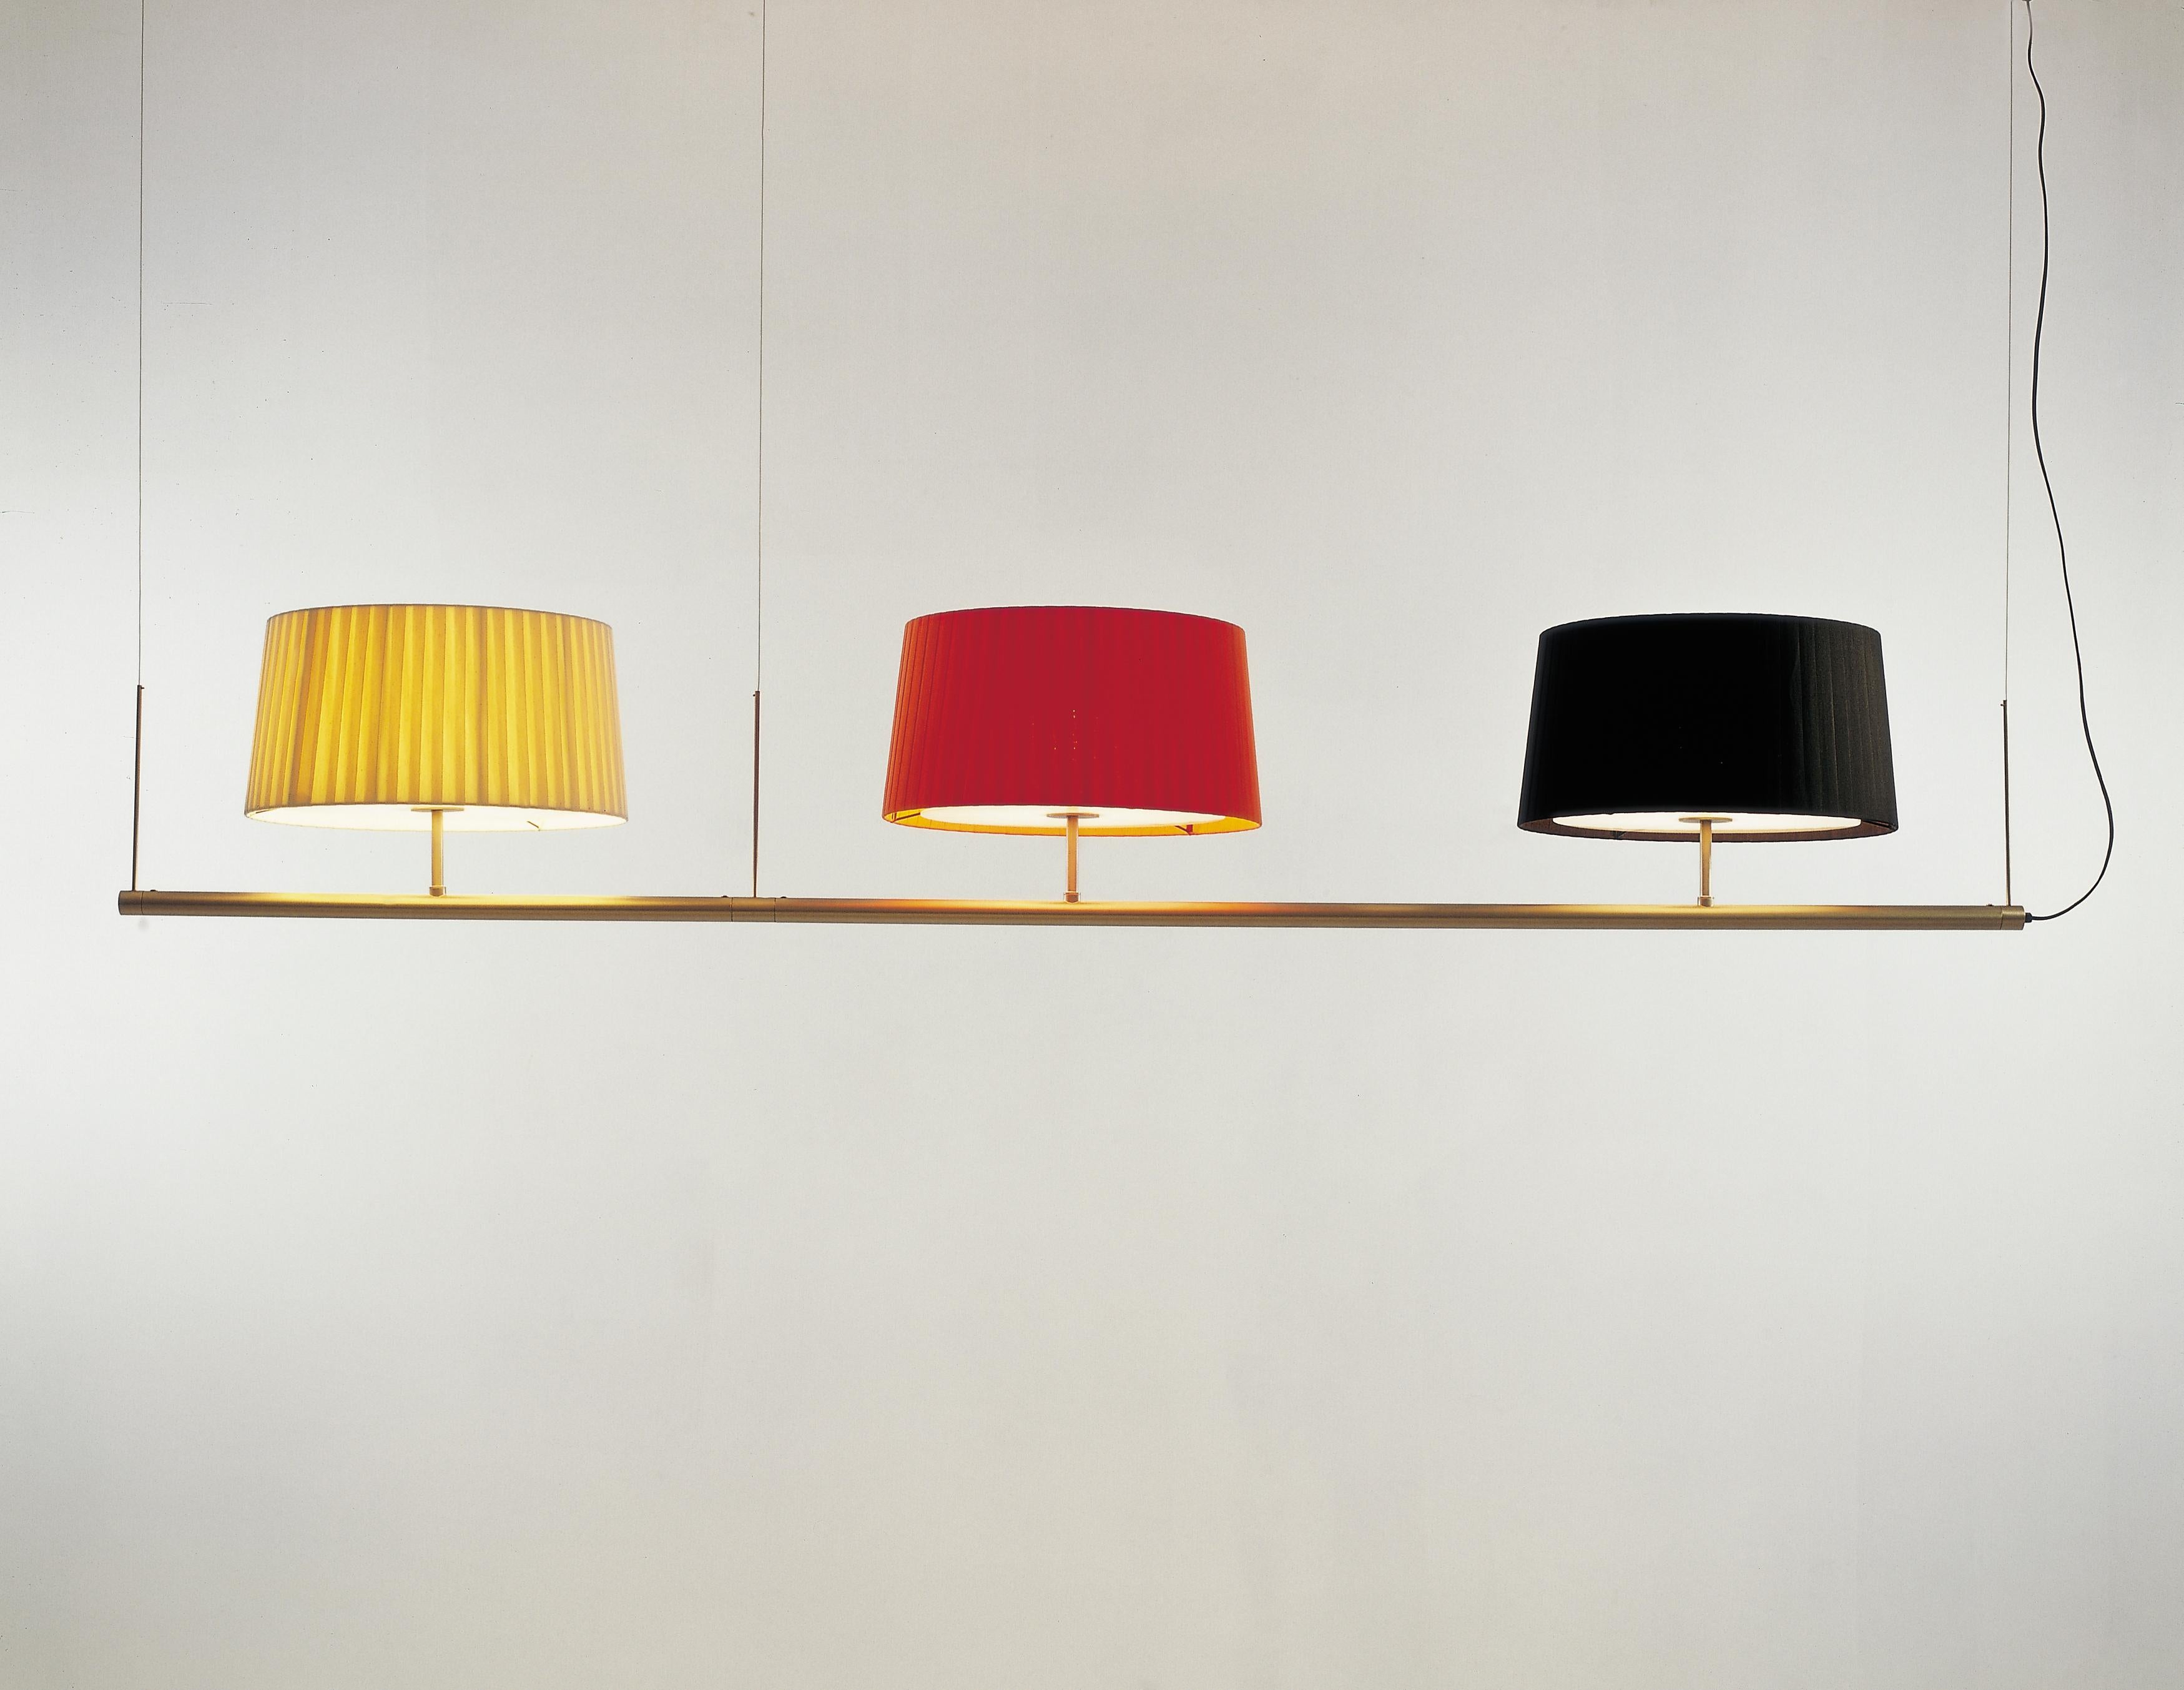 Sistema Gran Fonda pendant lamp I by Gabriel Ordeig Cole
Dimensions: D 45 x W 223 x H 35 cm
Materials: Metal, ribbon.
Lampshades: Mustard, Red and Black.
Available in other lampshade colors.
Available in multiple composition